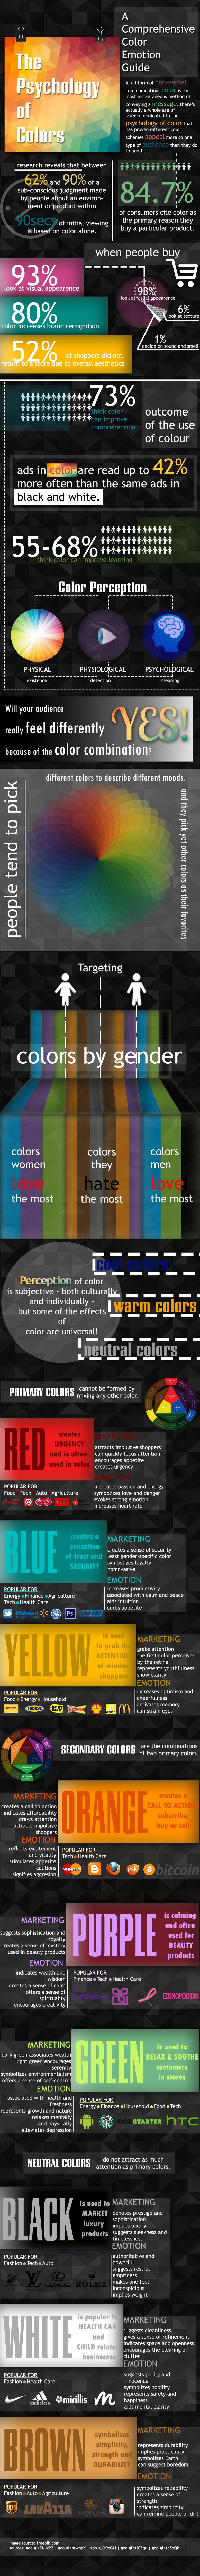 the_psychology_of_colors-a_comprehensive_color_guide